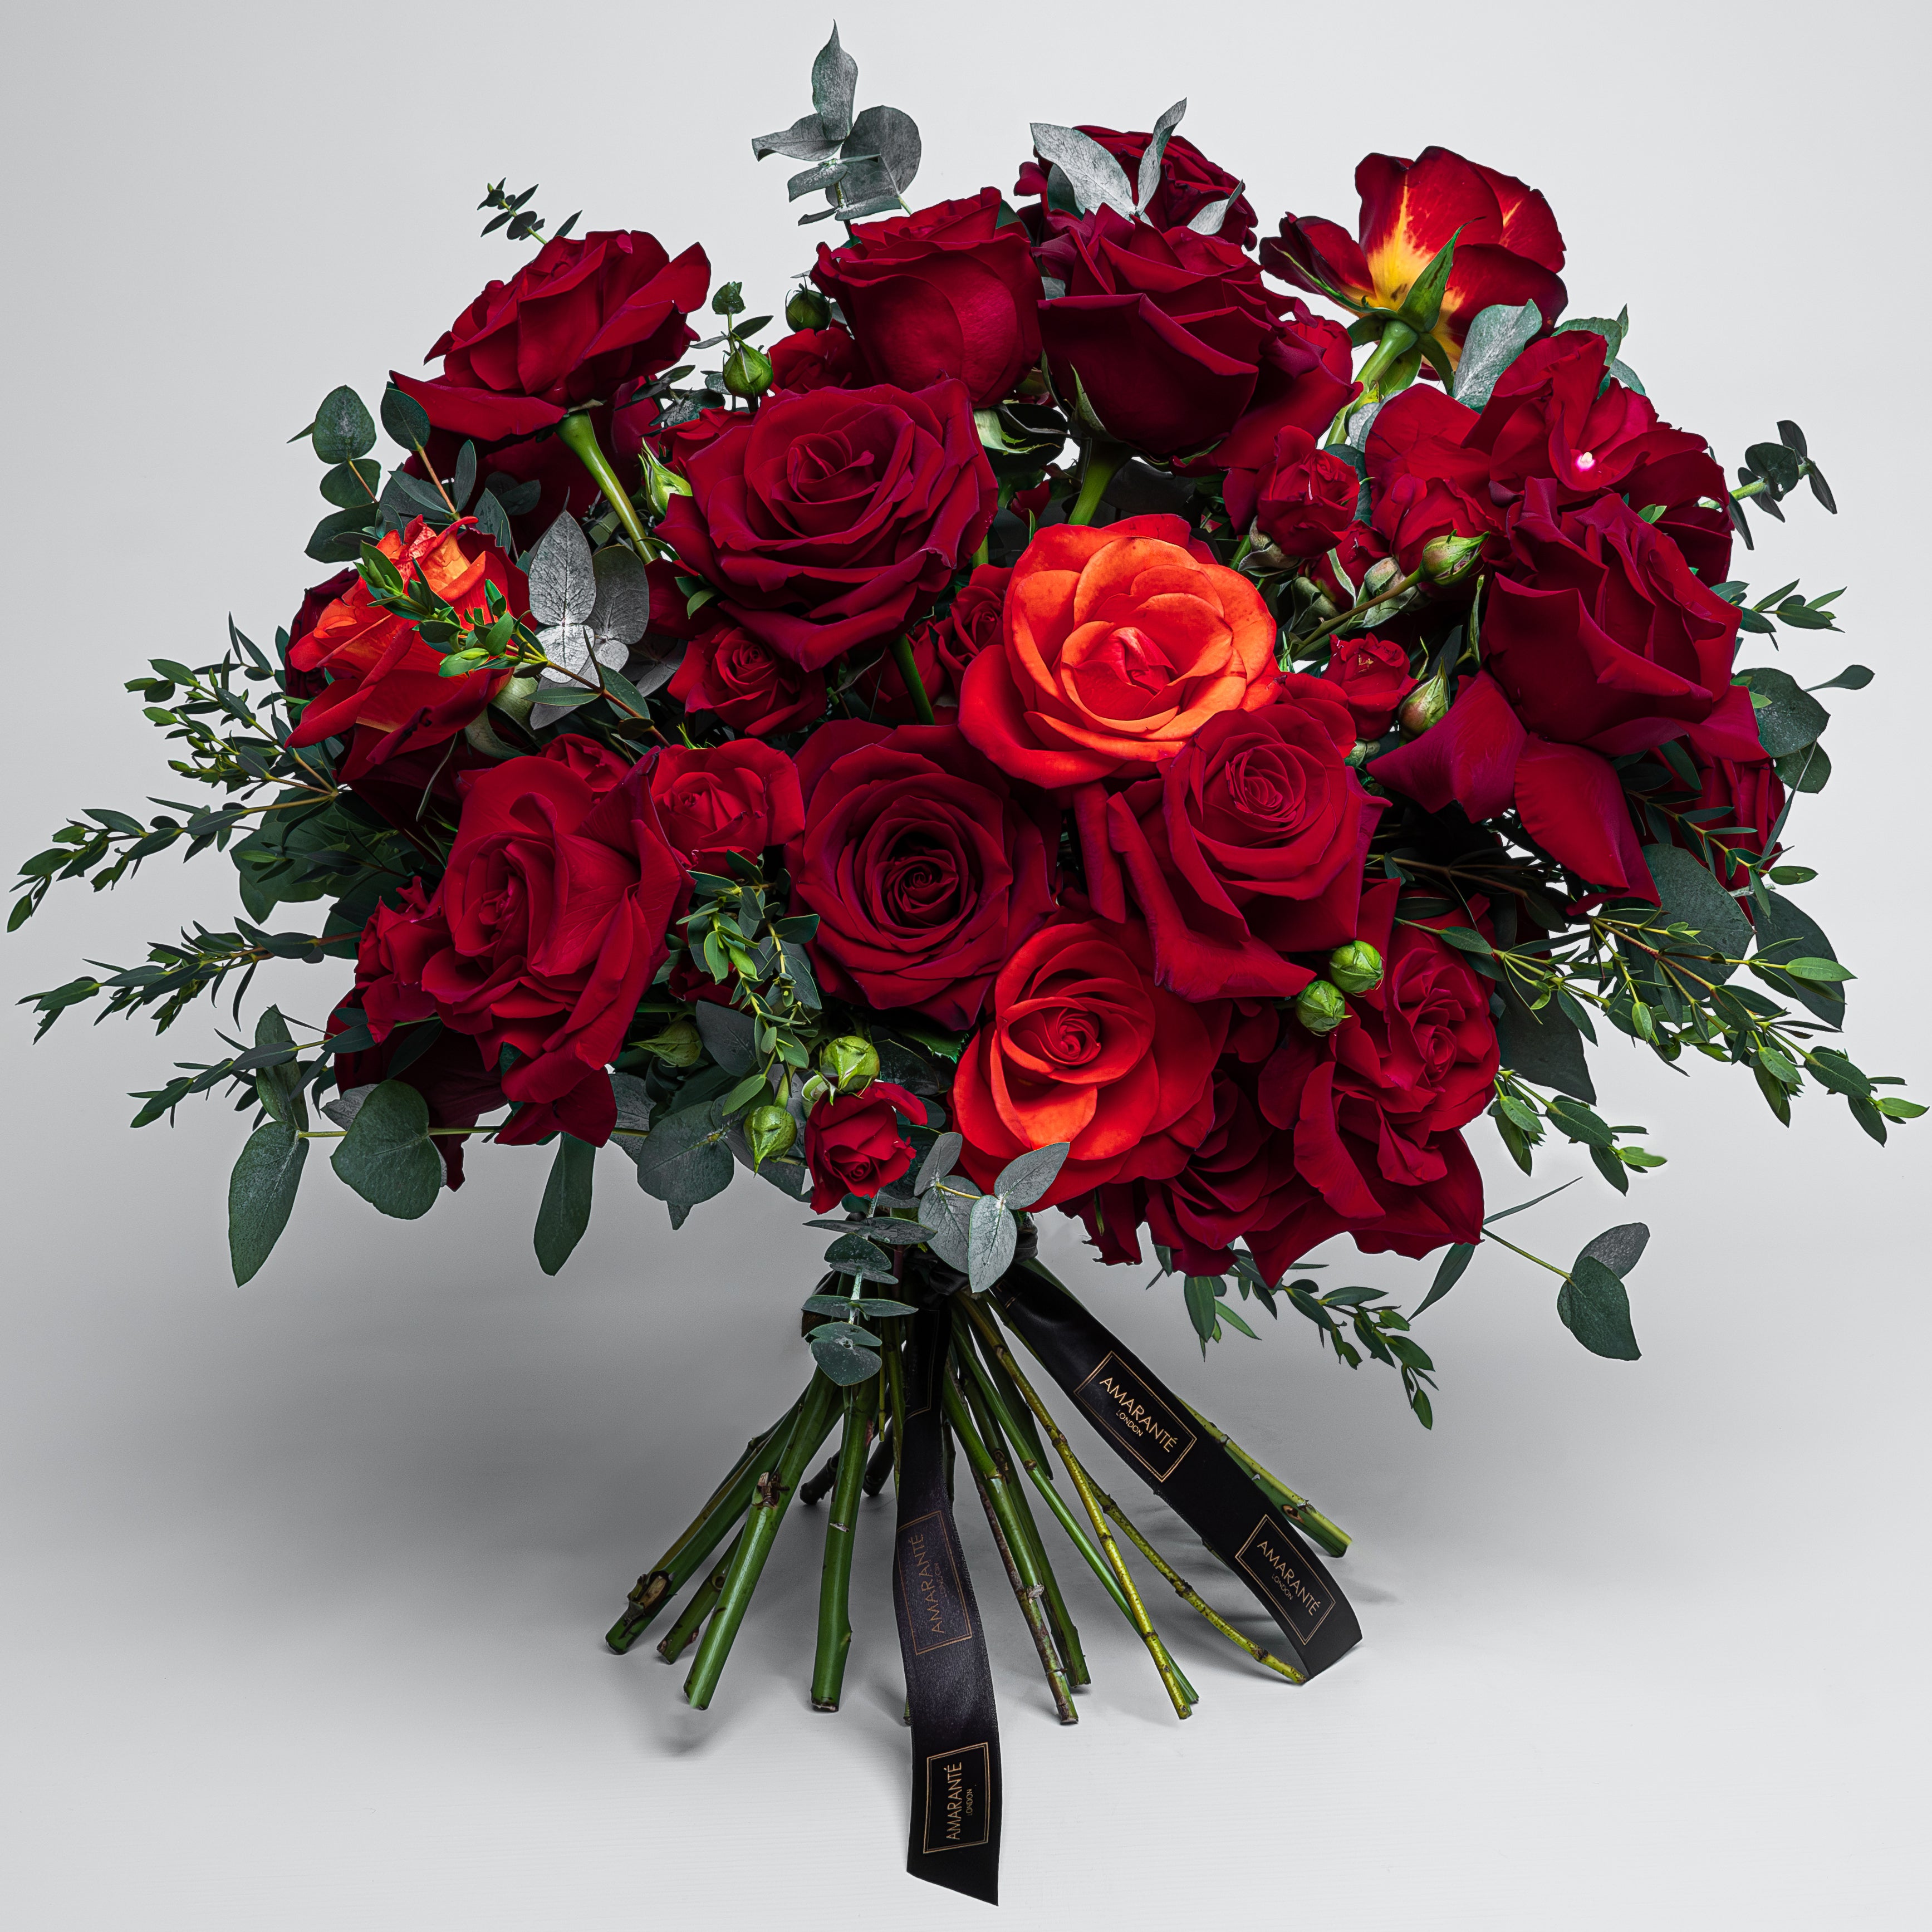 A captivating fresh flower Valentine's Day bouquet showcasing exquisite arrangements of elegant red roses in vibrant shades, perfectly symbolising love and affection. This sophisticated and refined bouquet exudes a timeless sense of elegance and grace, perfectly designed for a stylish and classy Vday gesture. This polished and luxurious bouquet of roses, available with free UK delivery, is the ideal sophisticated representation of your chic and trendy affection.